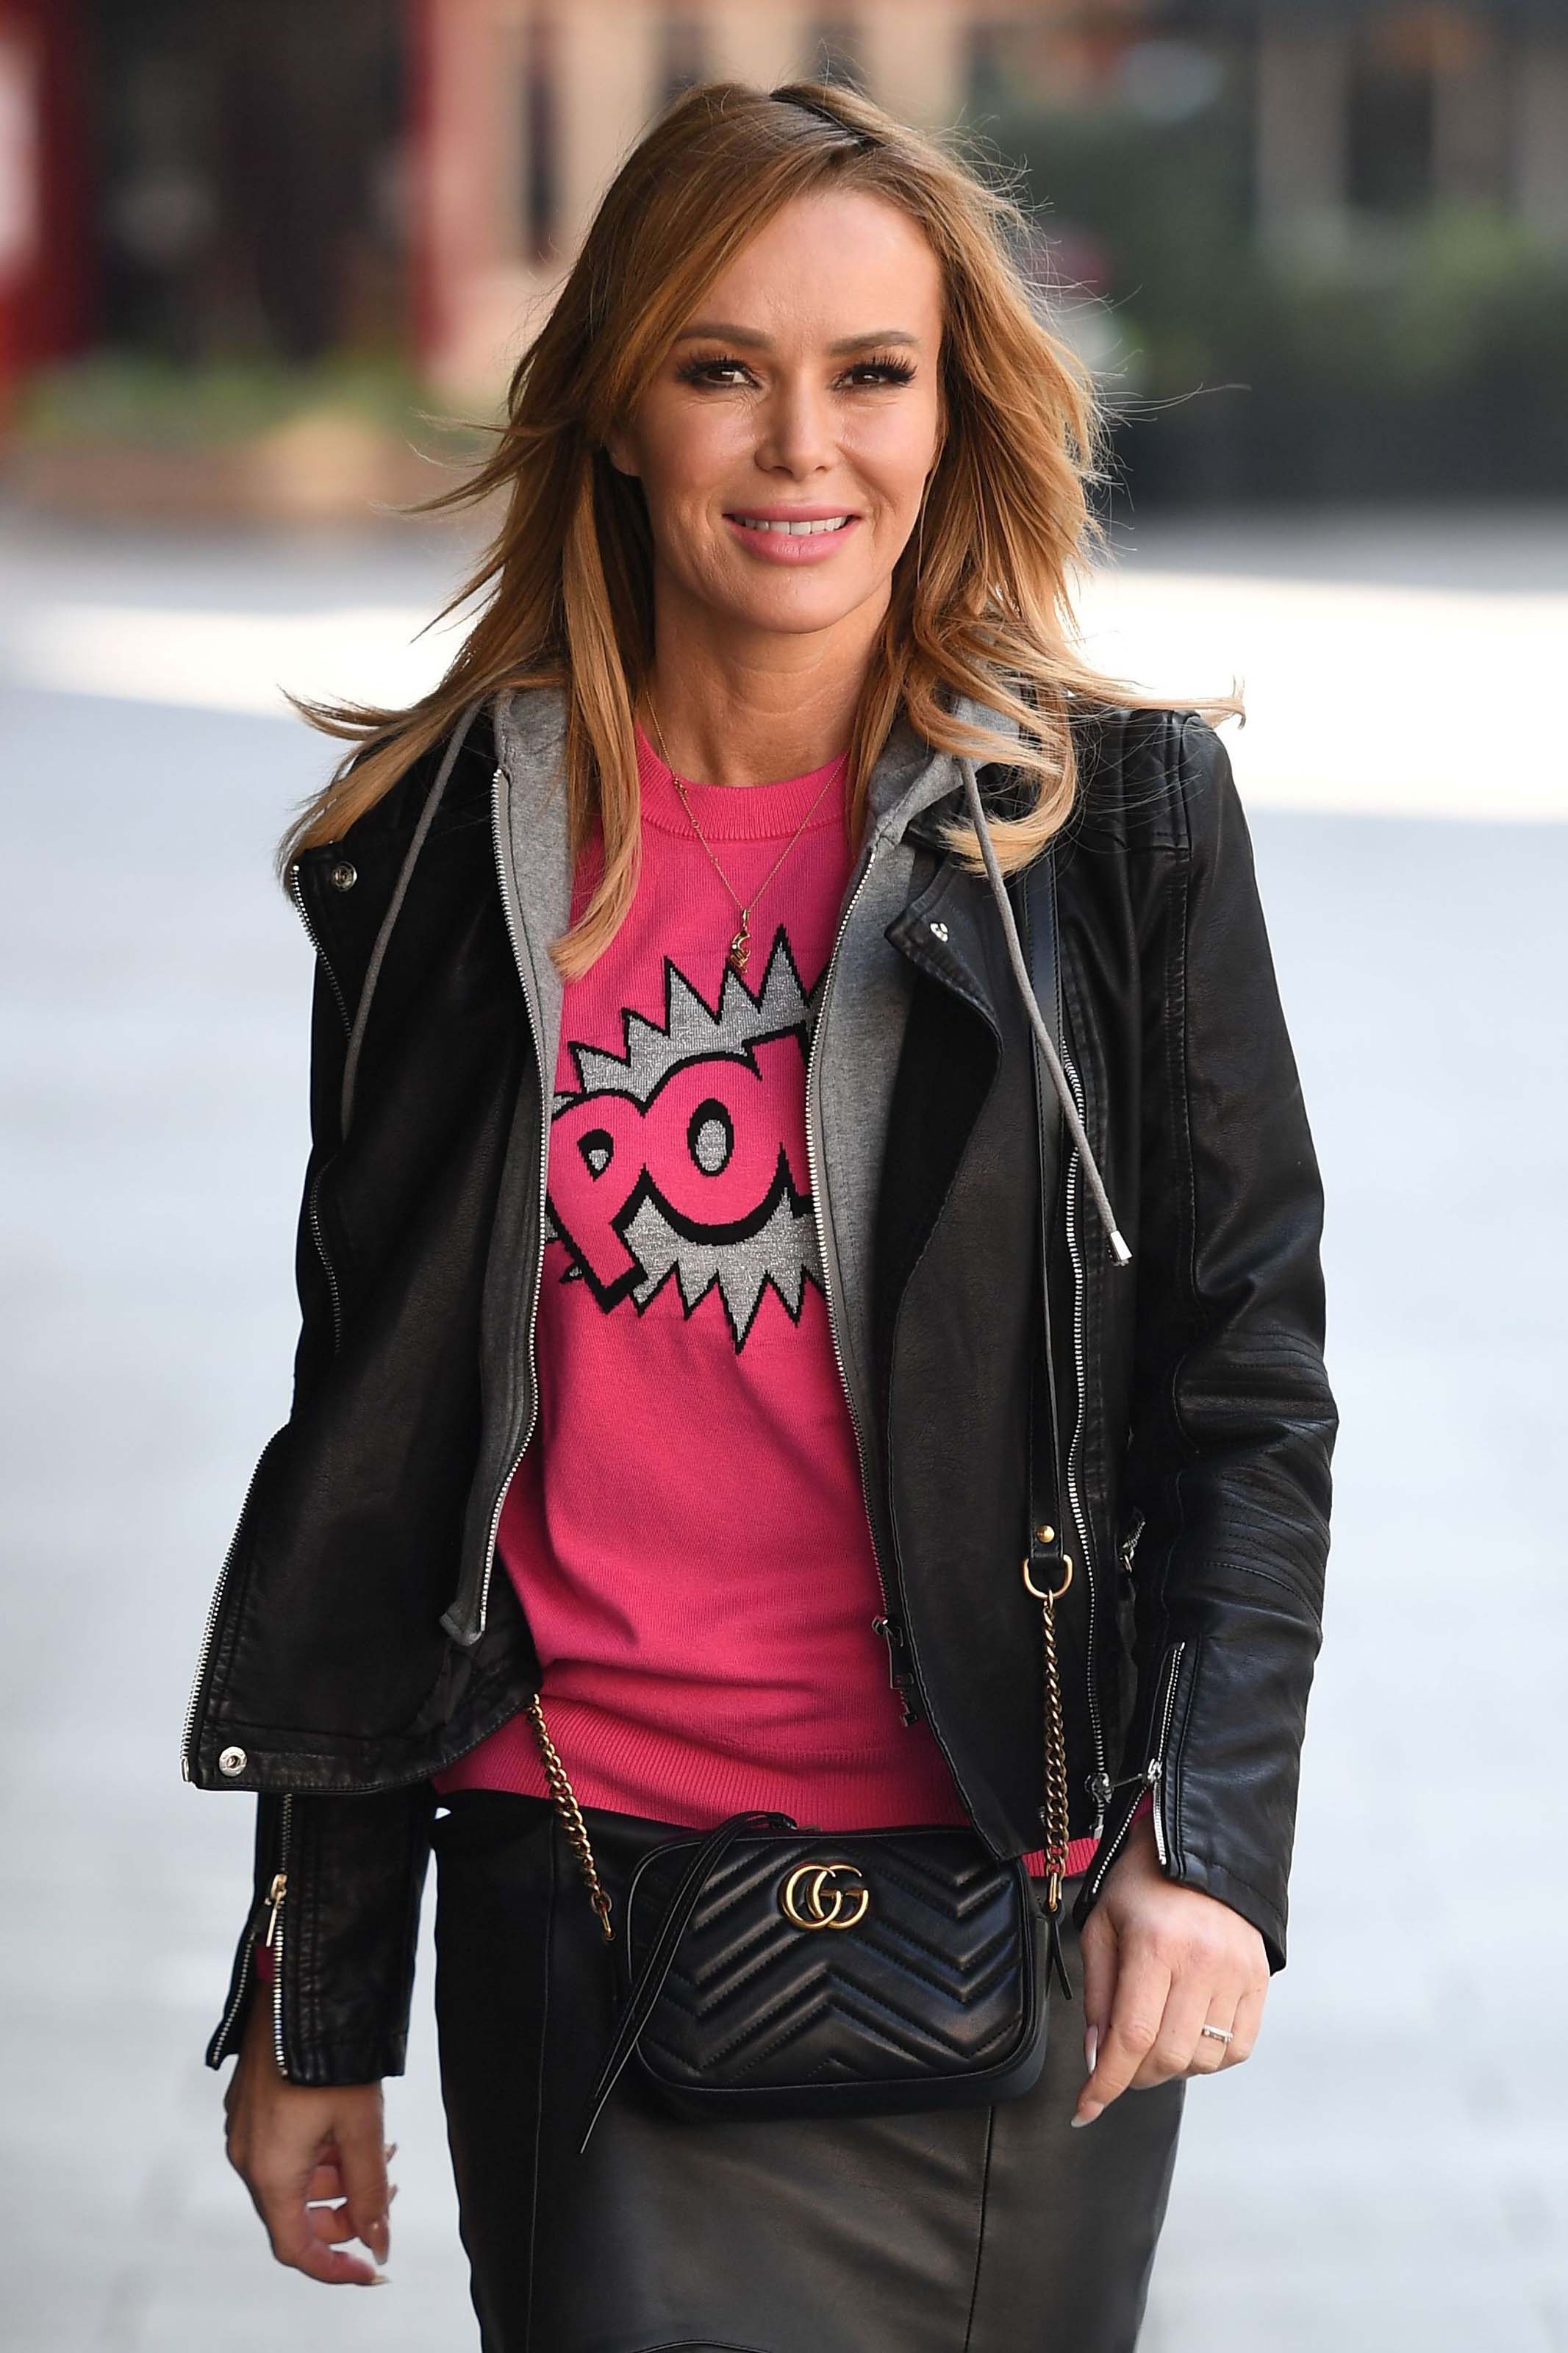 Amanda Holden at Heart Radio in London 27th March 2020